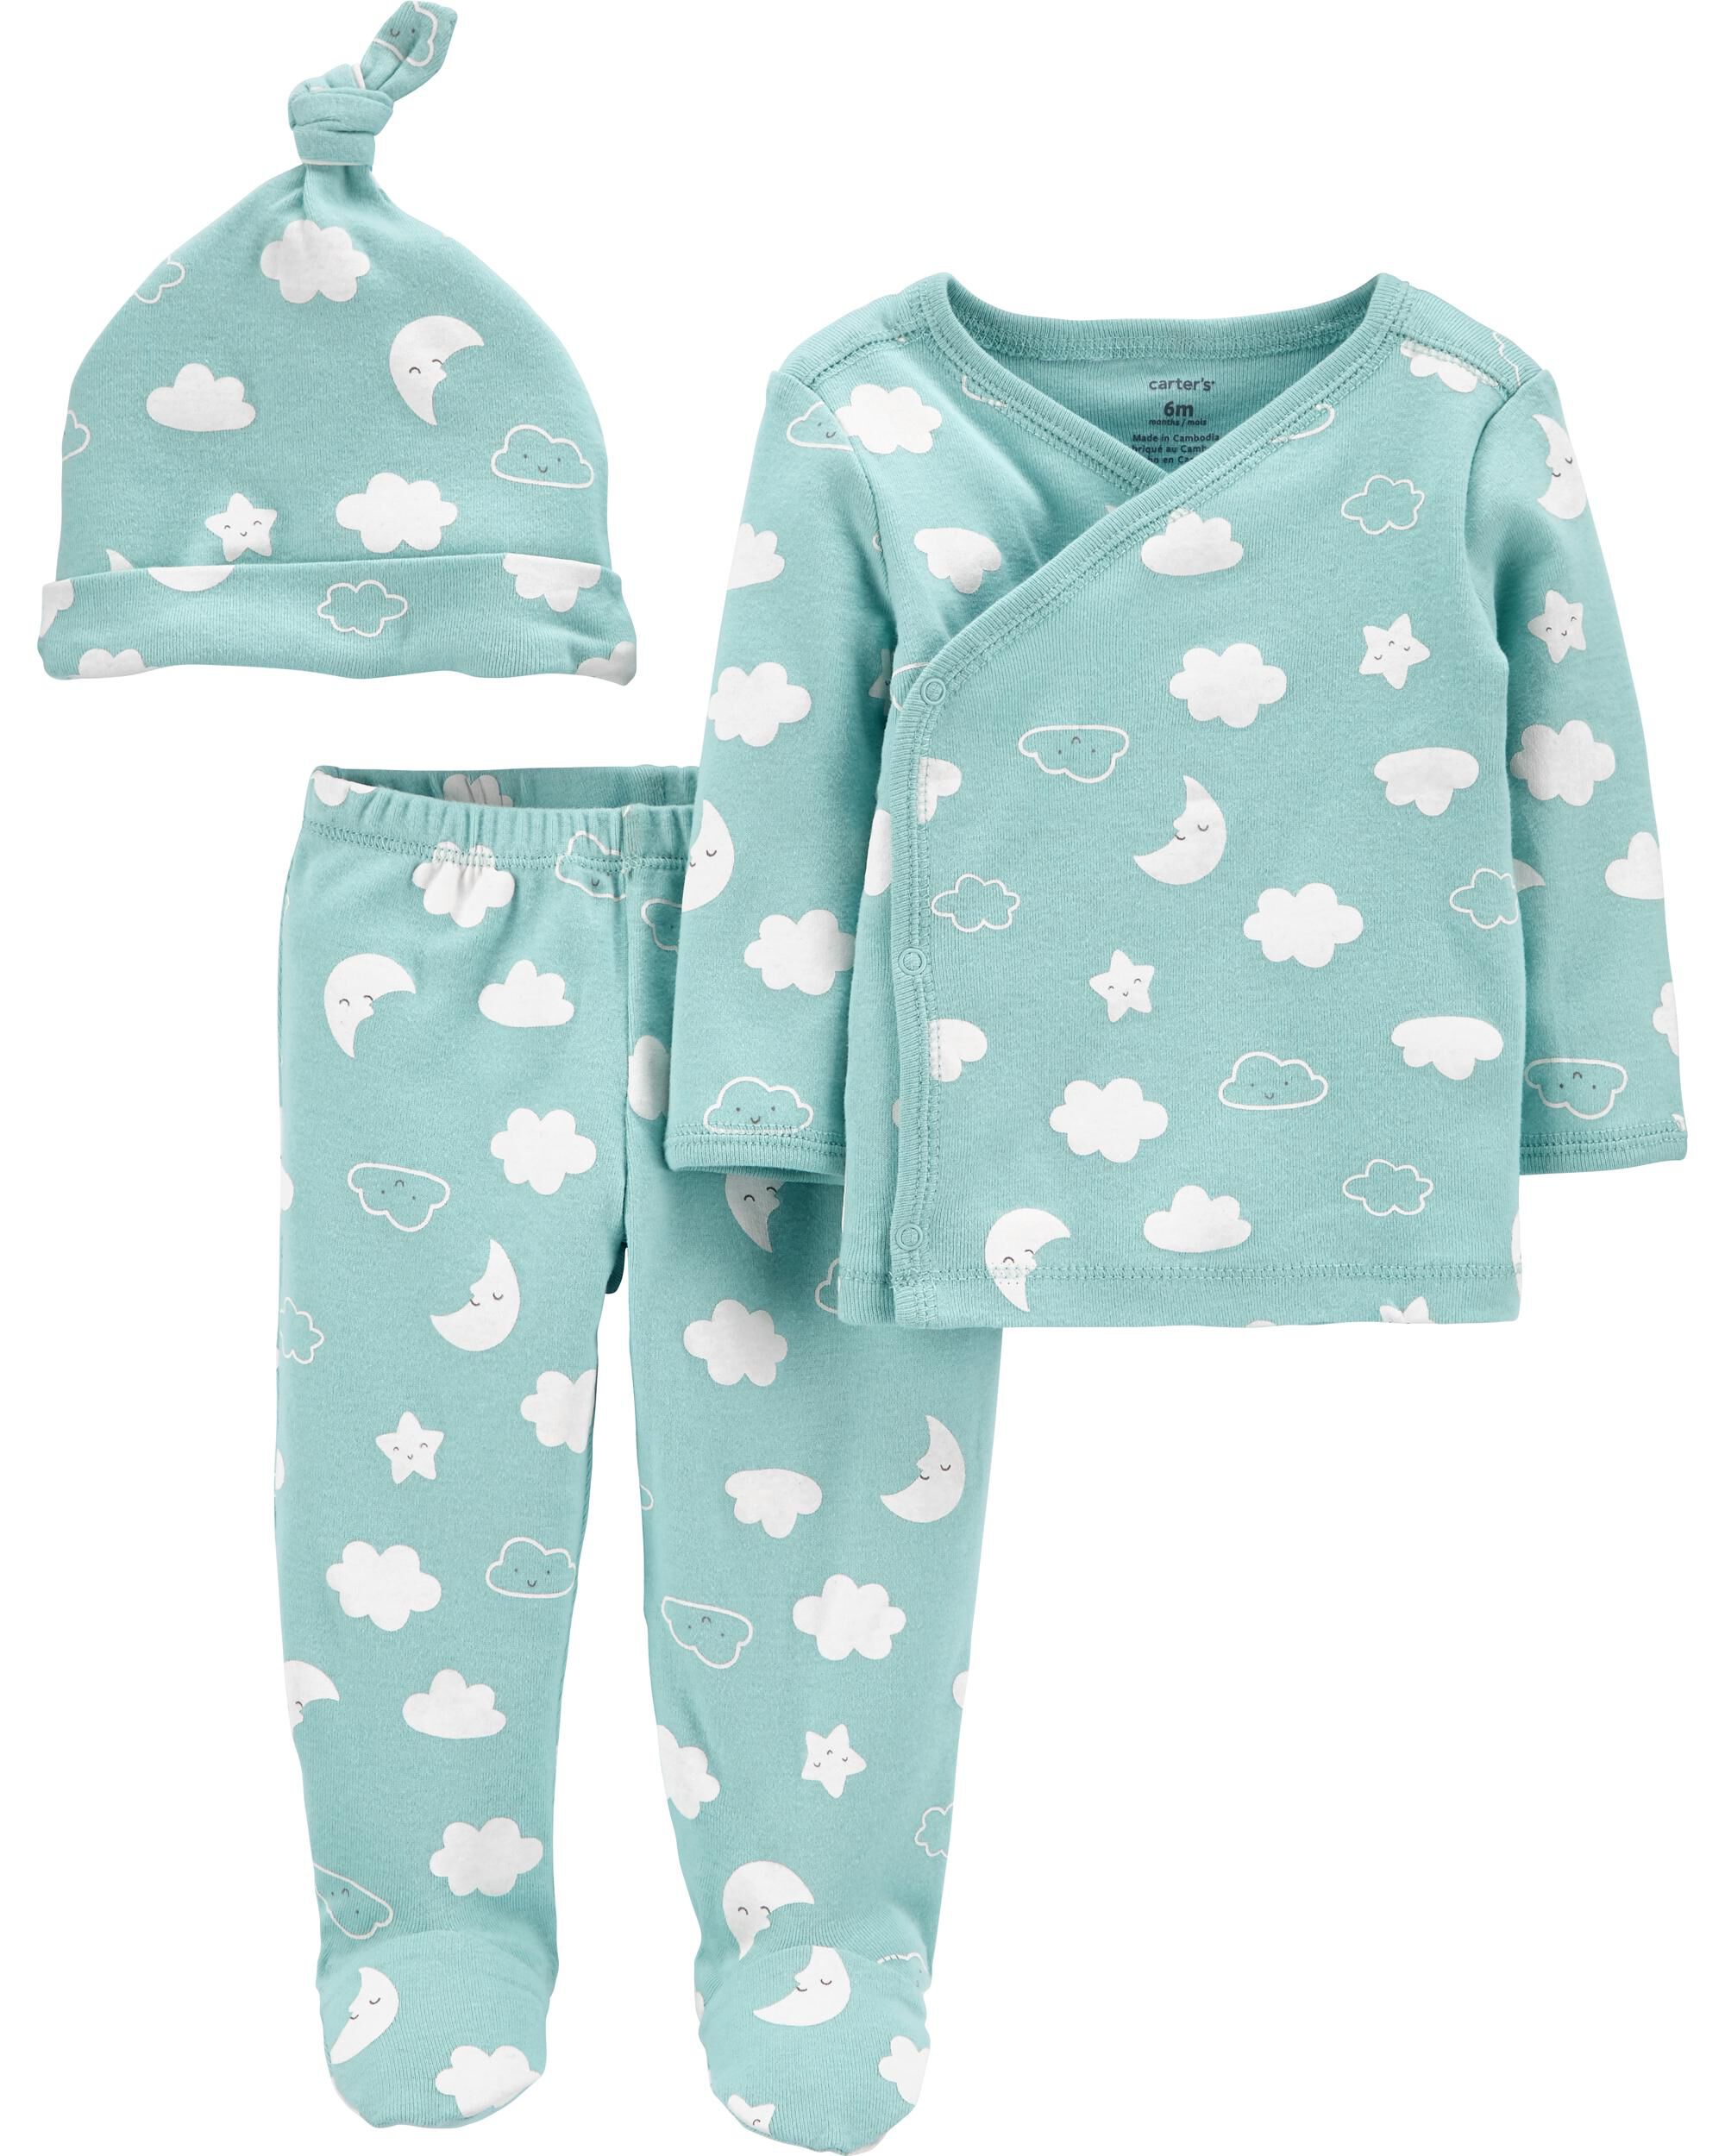 Details about   Carter's 3-Piece Pajama Set Size 18 Months NWT 